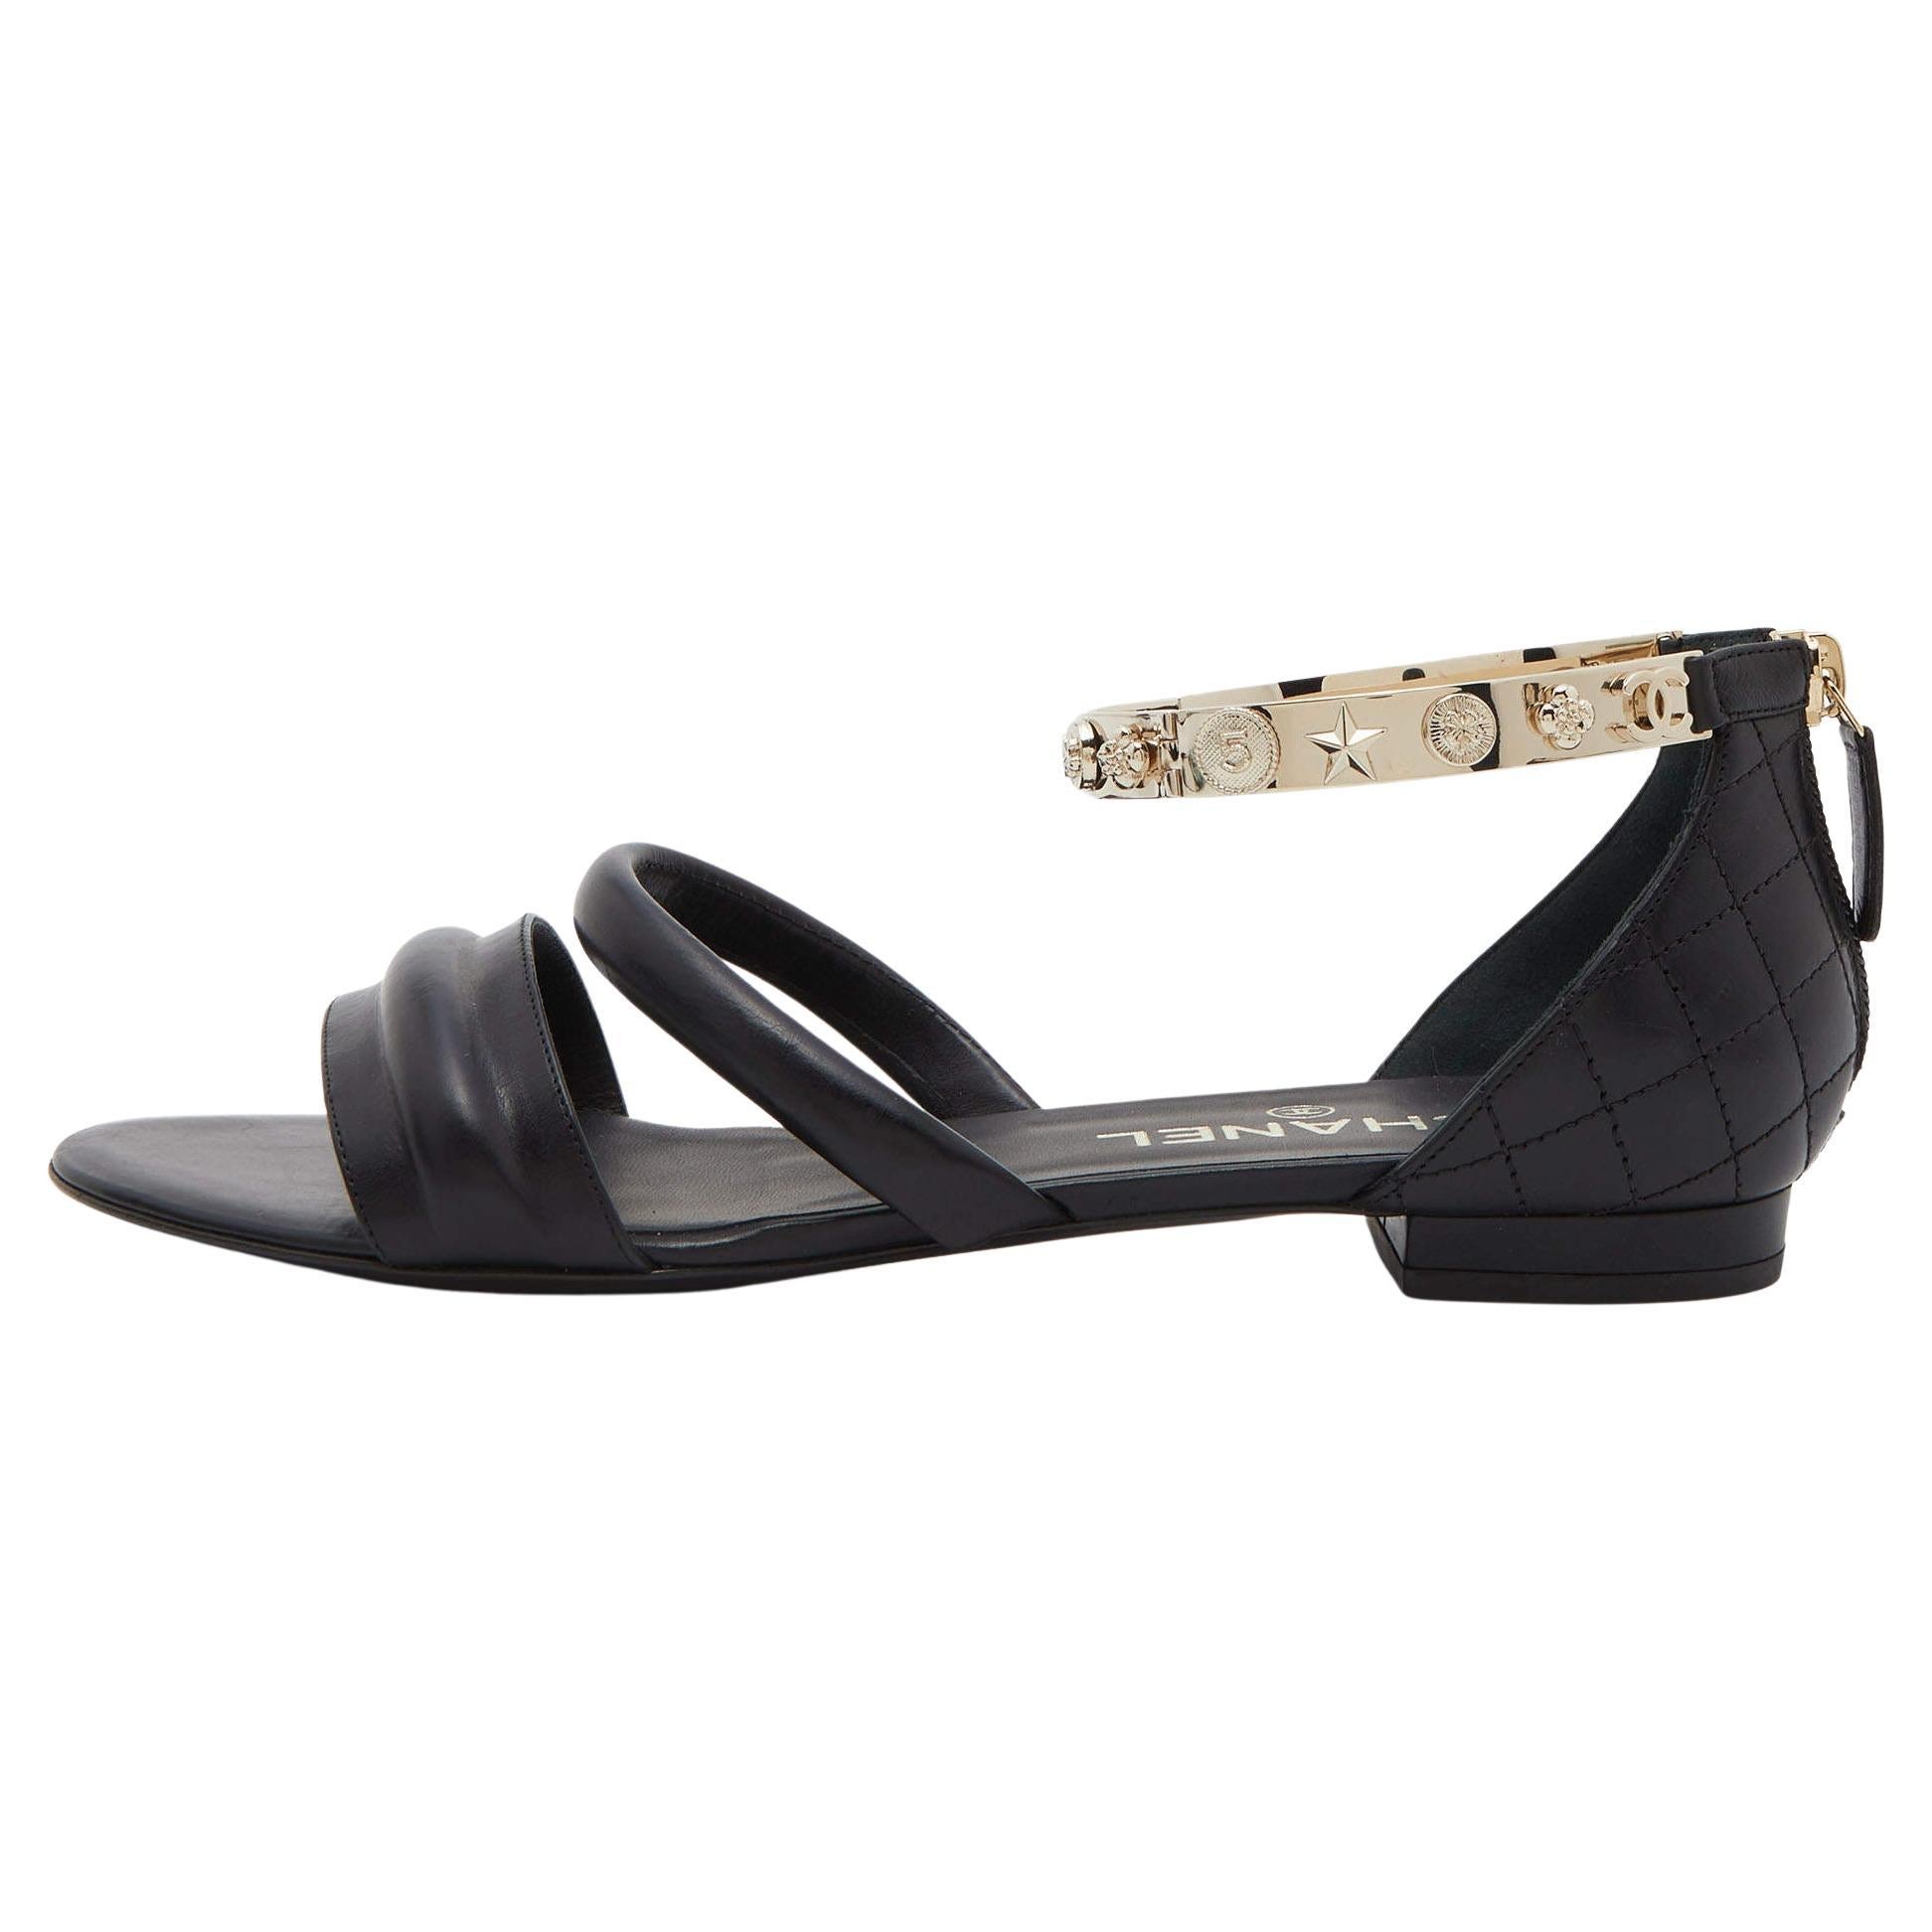 Chanel Quilted Sandals - 9 For Sale on 1stDibs  chanel dad sandals size  41, black quilted sandals, chanel dad sandals 36